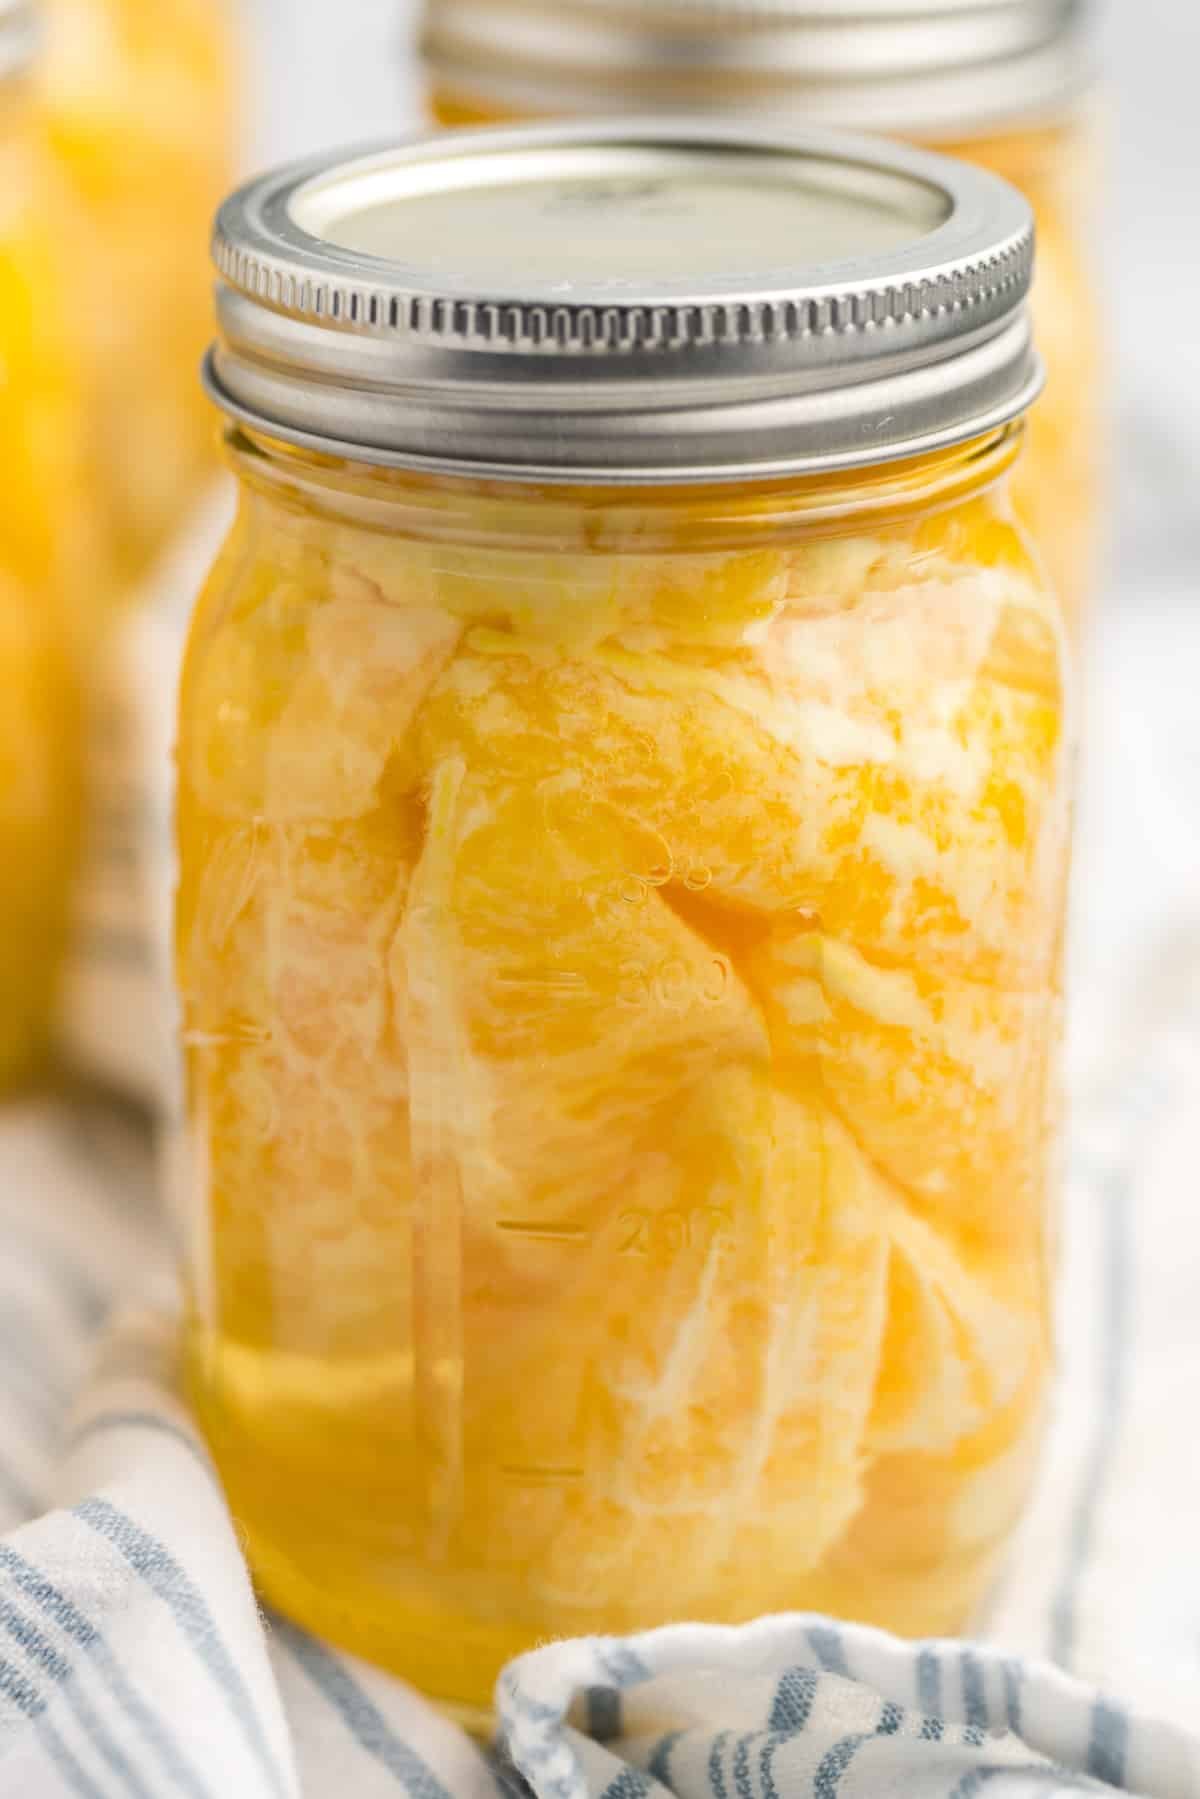 A canning jar with oranges encased in a liquid.